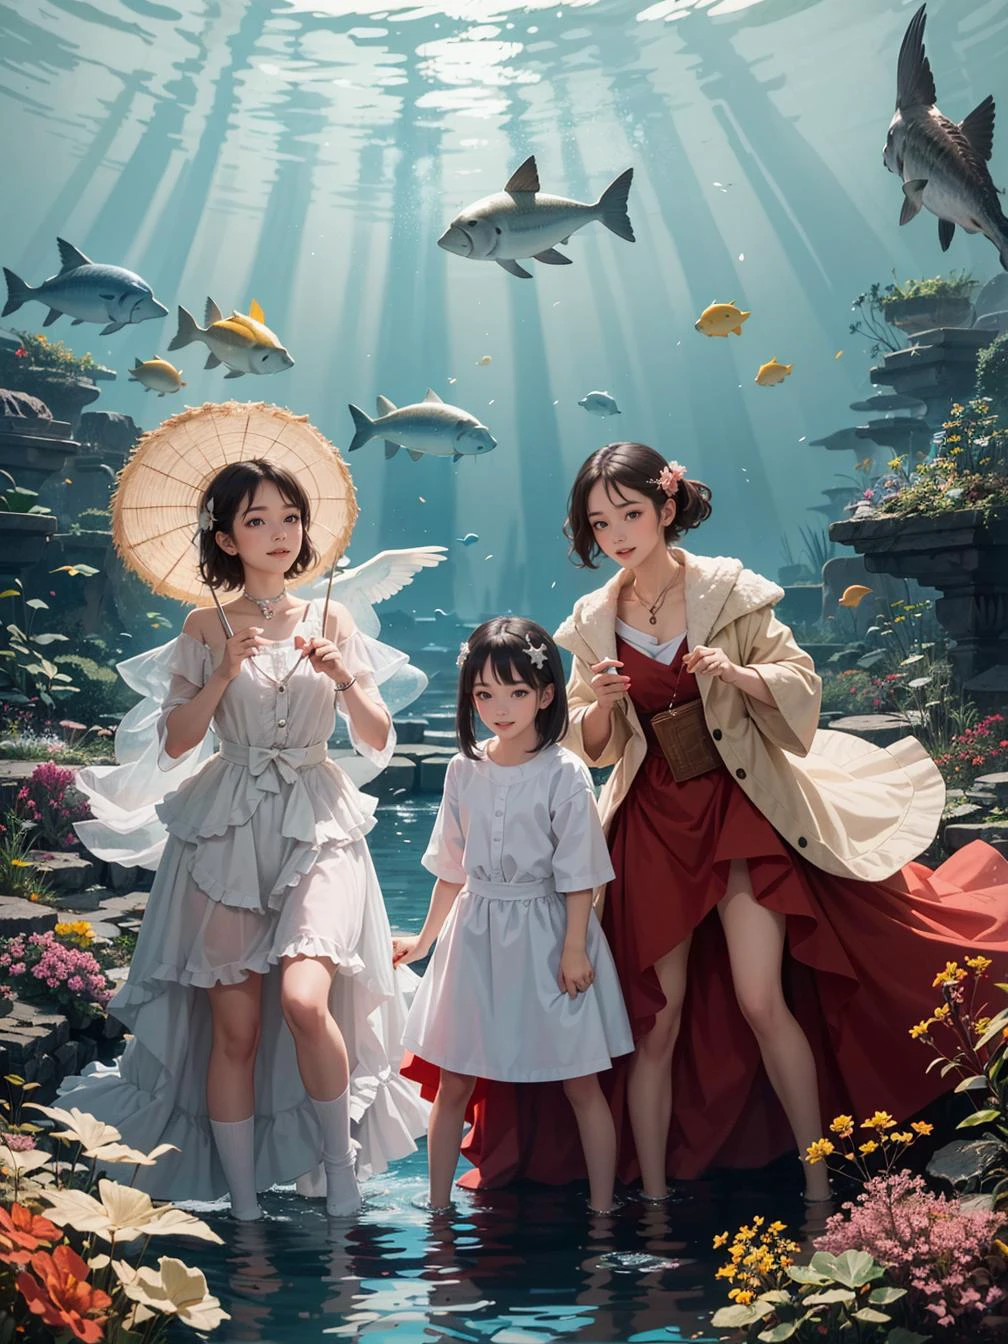 multiple girls, 3girls,books,short hair,laughing
High-definition image of a woman, her hair adorned with luminous pearls, eyes shimmering like the sea. Wearing a dress made from woven seashells, she is in an underwater kingdom where fish speak and corals glow. The scene, bathed in the soft ocean light, captured in the style of a Jules Verne's novel illustration.
masterpiece, best quality, official art,